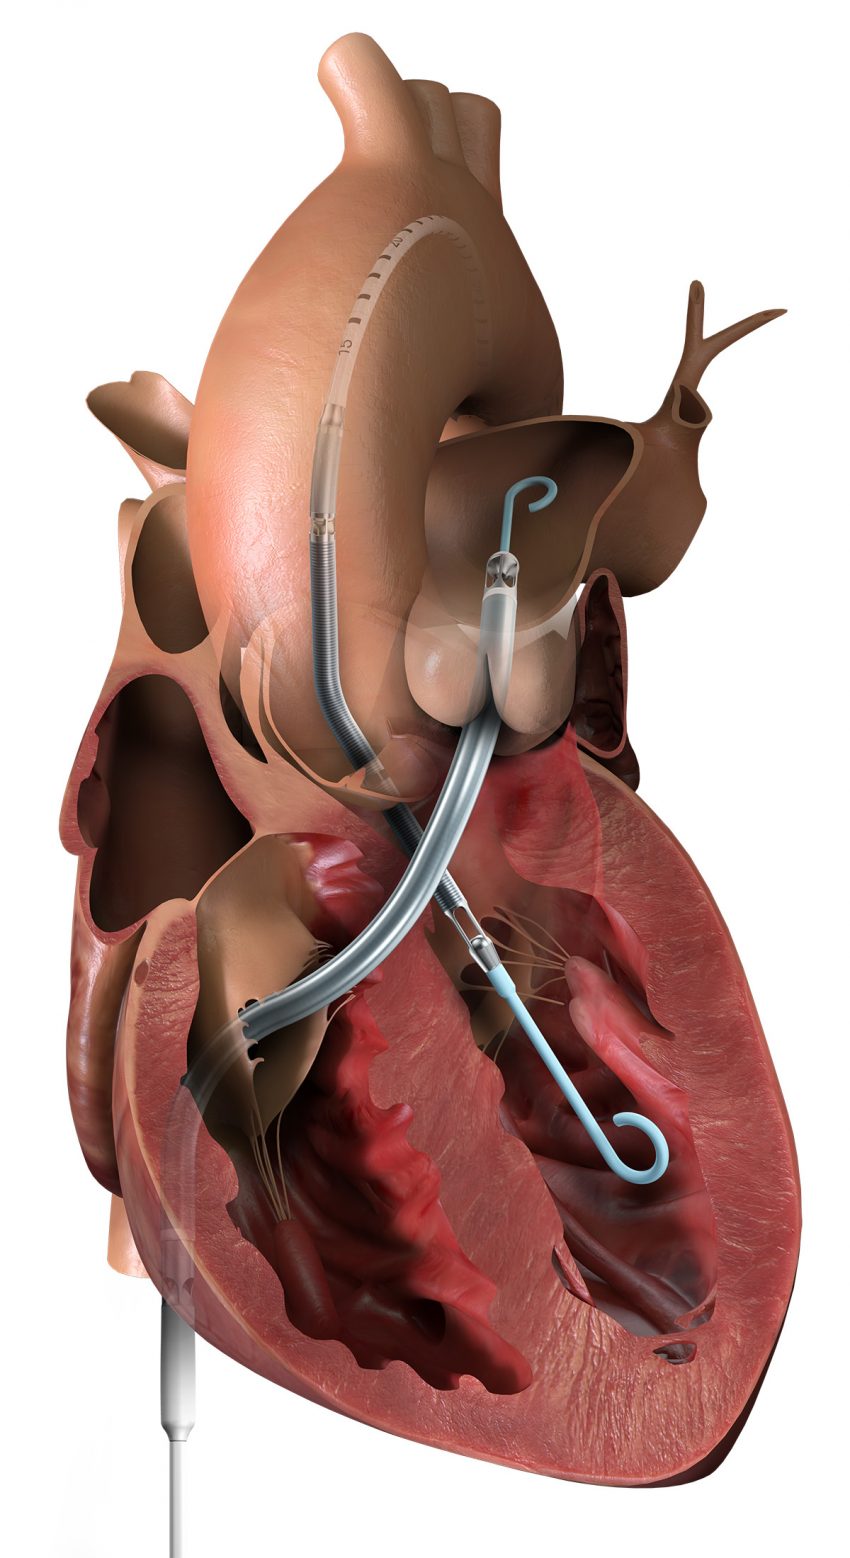 The Impella Is the World's Smallest Heart Pump